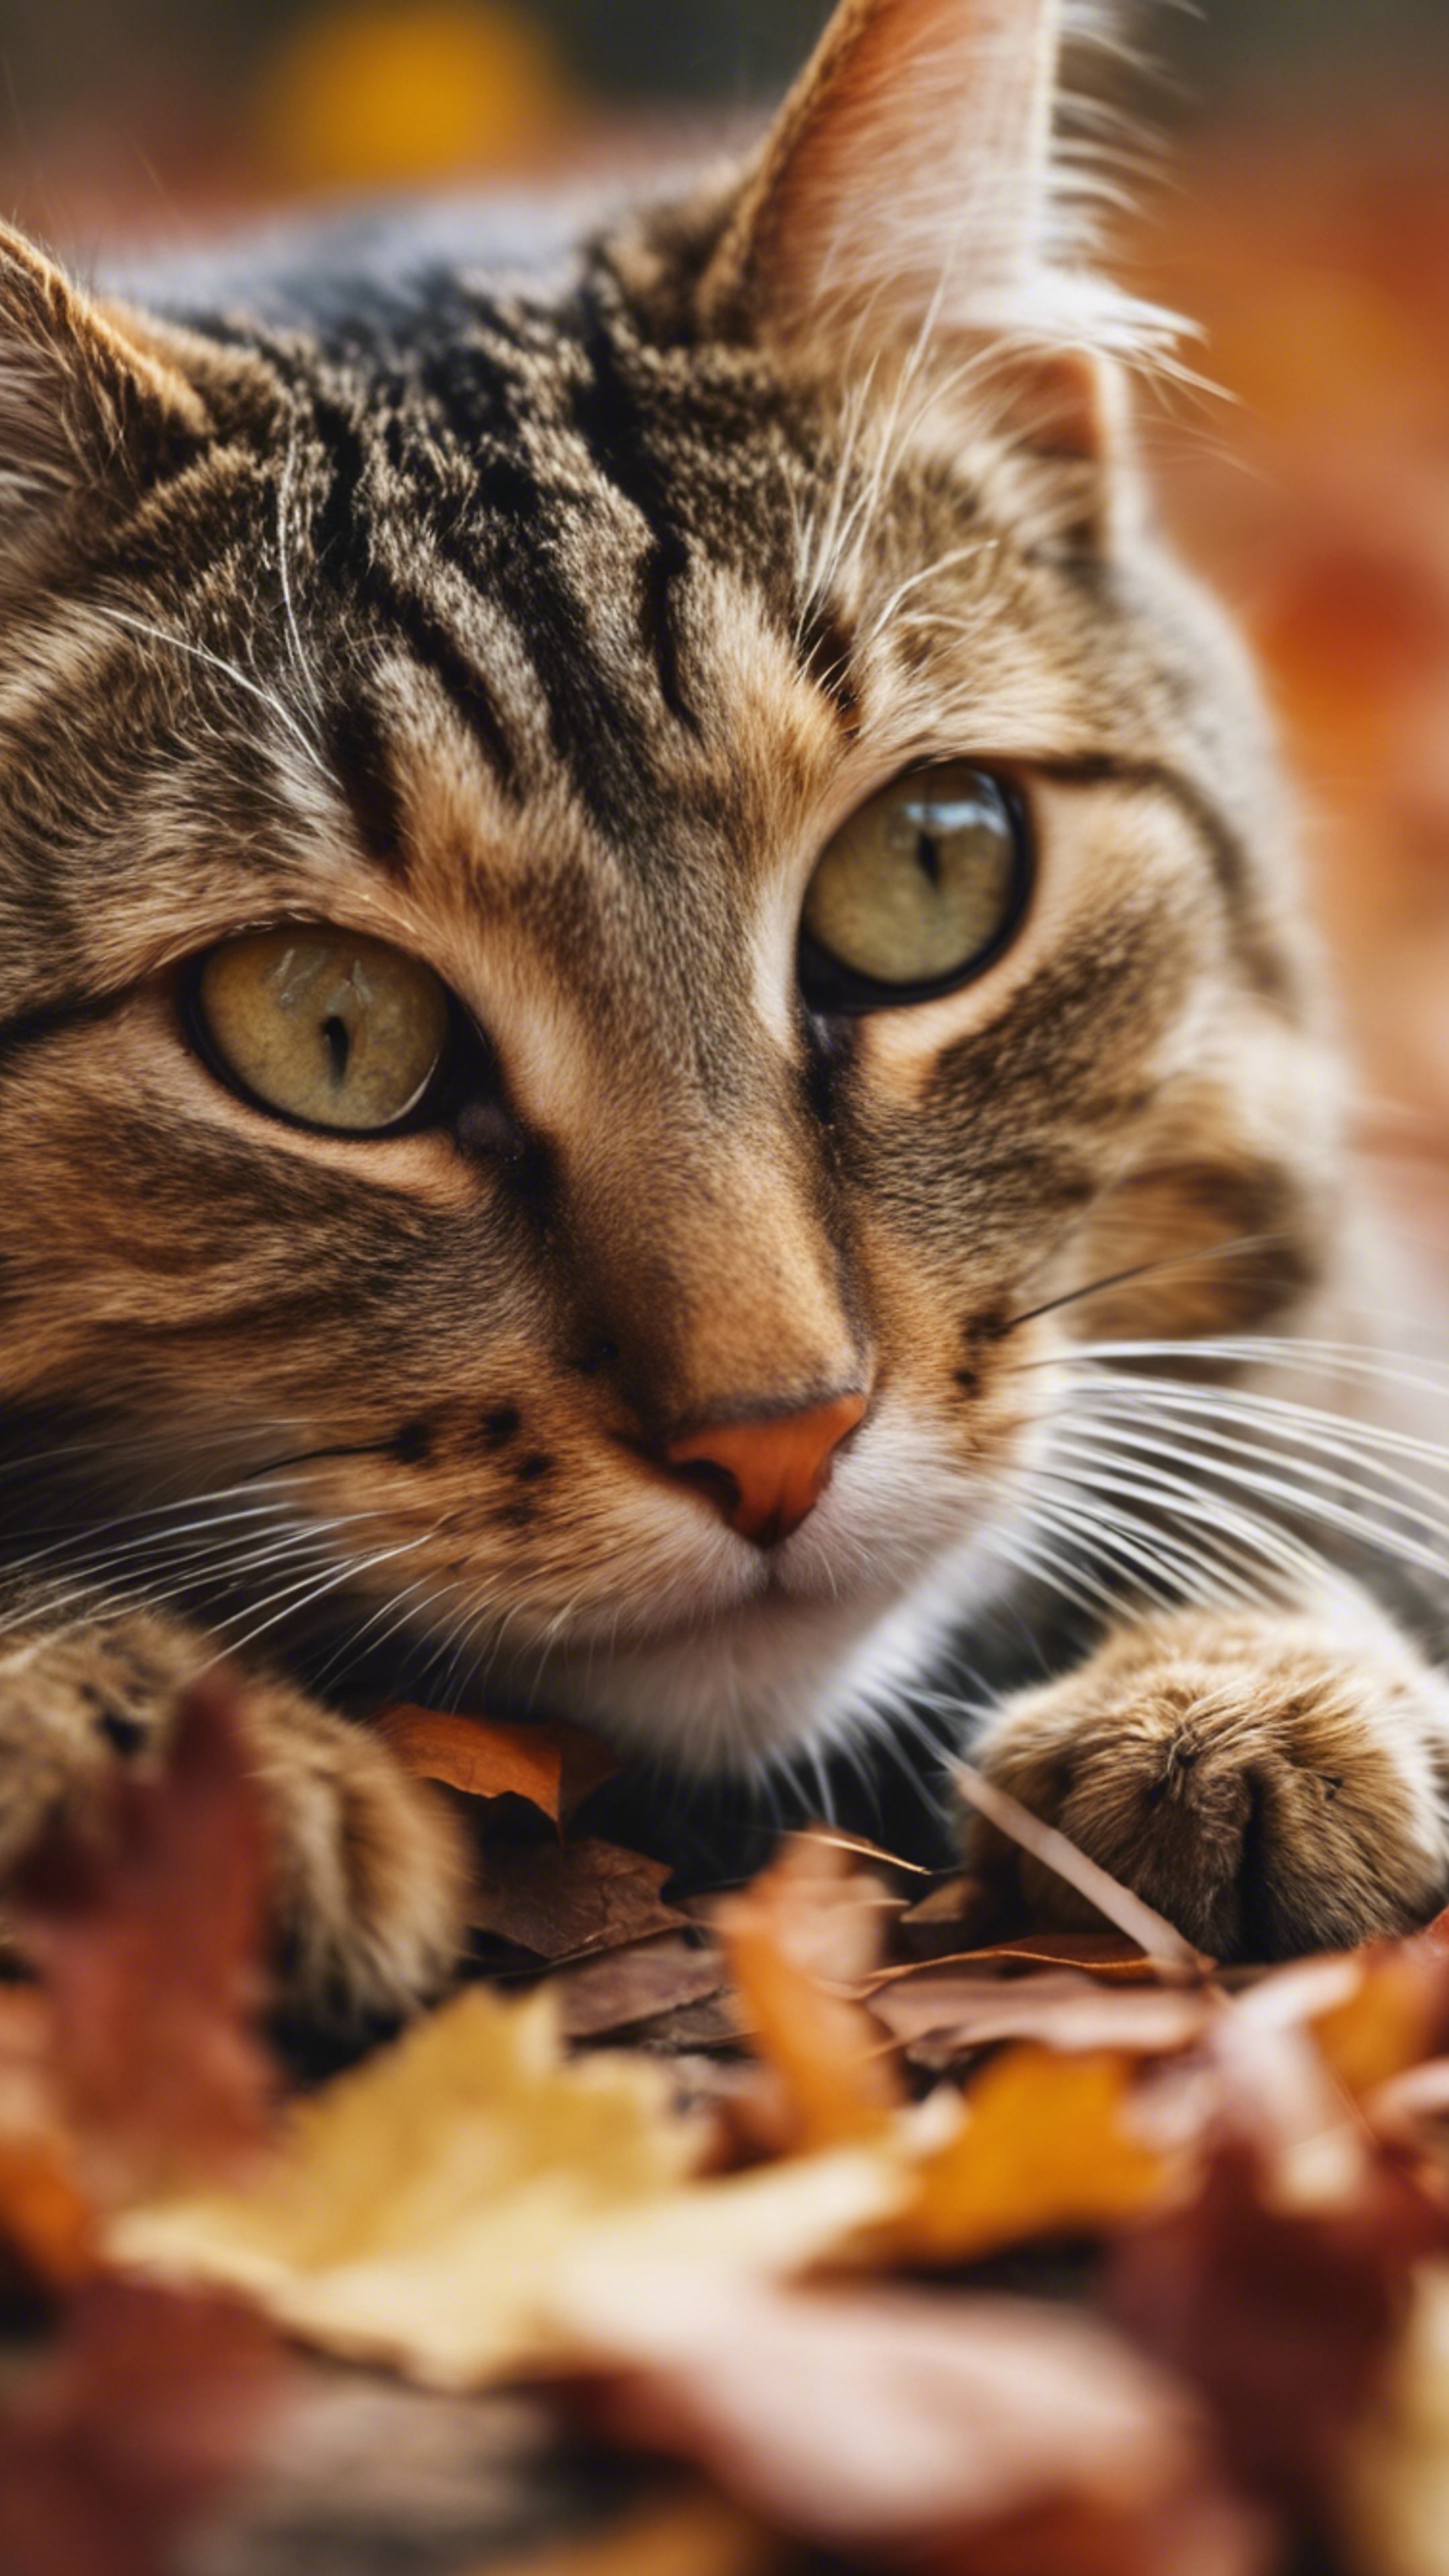 A falling leaf crunches under the paw of an inquisitive tabby cat in the colours of autumn.壁紙[5f8125a5764f4e8ca44e]